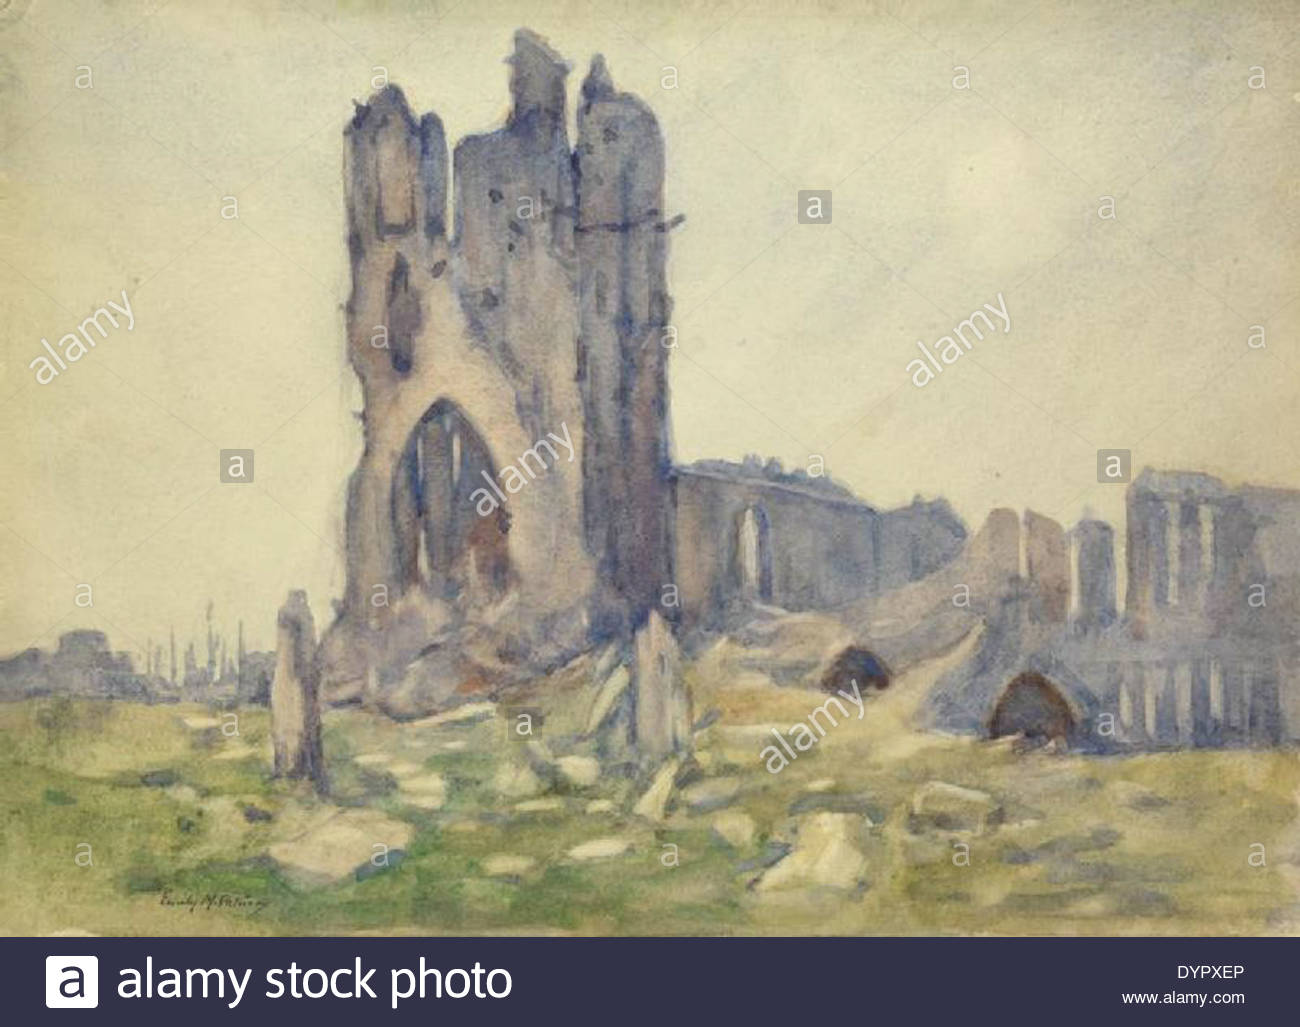 Cloth Hall Ypres Stock Photos & Cloth Hall Ypres Stock Images - Alamy